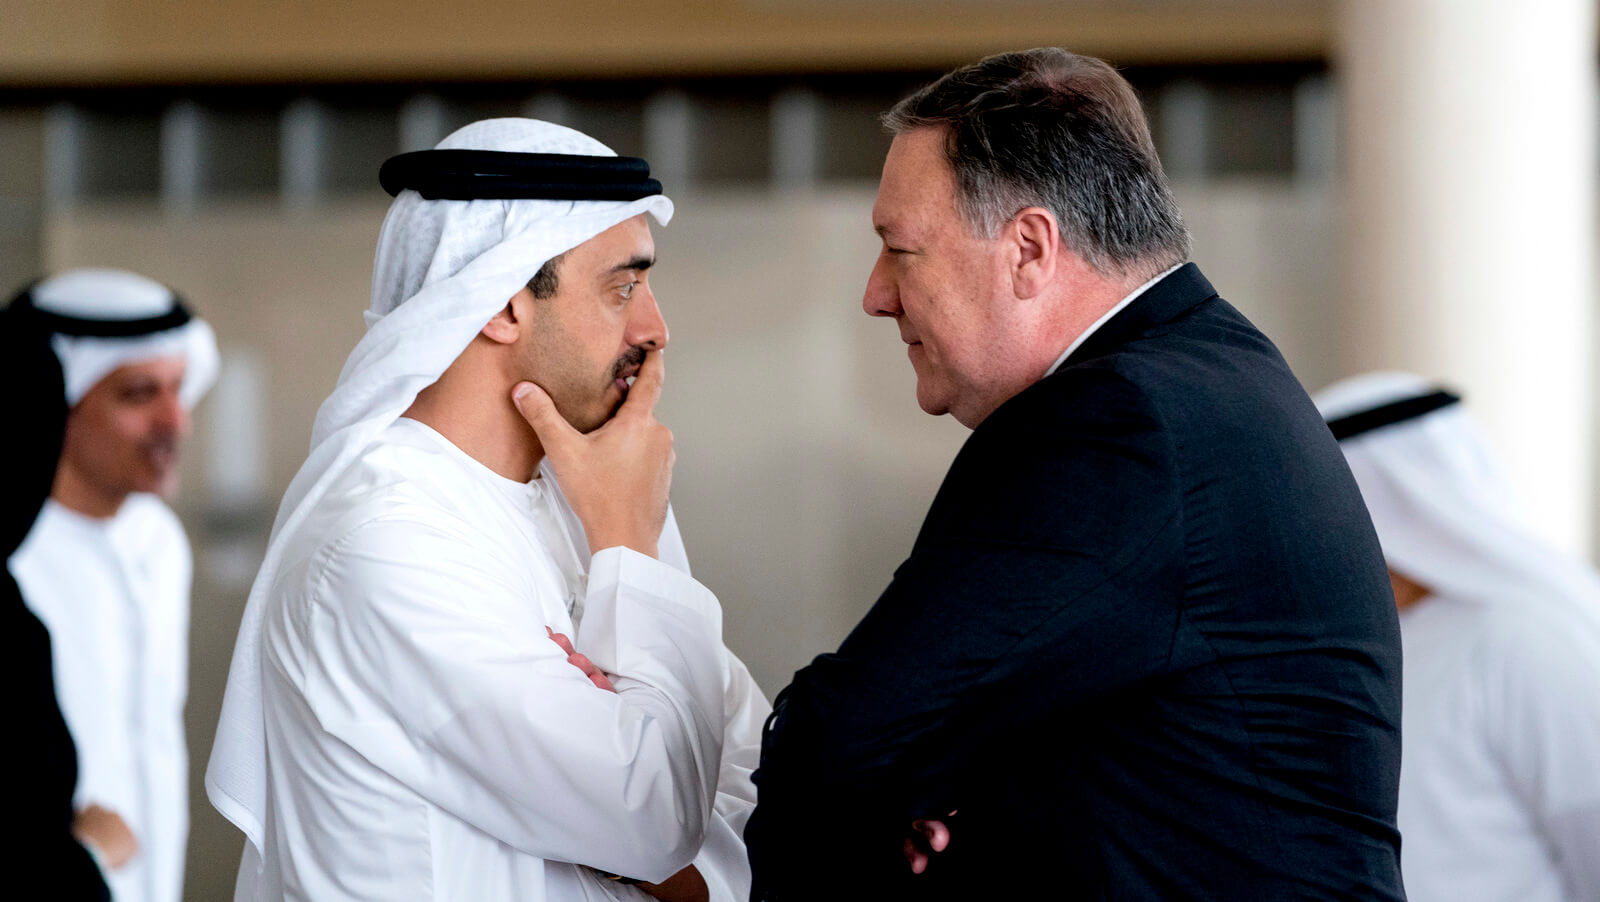 Mike Pompeo speaks with UAE Foreign Minister Abdullah bin Zayed Al Nahyan in Abu Dhabi‎ ahead of Pompeo's visit to Afghanistan, July 10, 2018. Andrew Harnik | AP